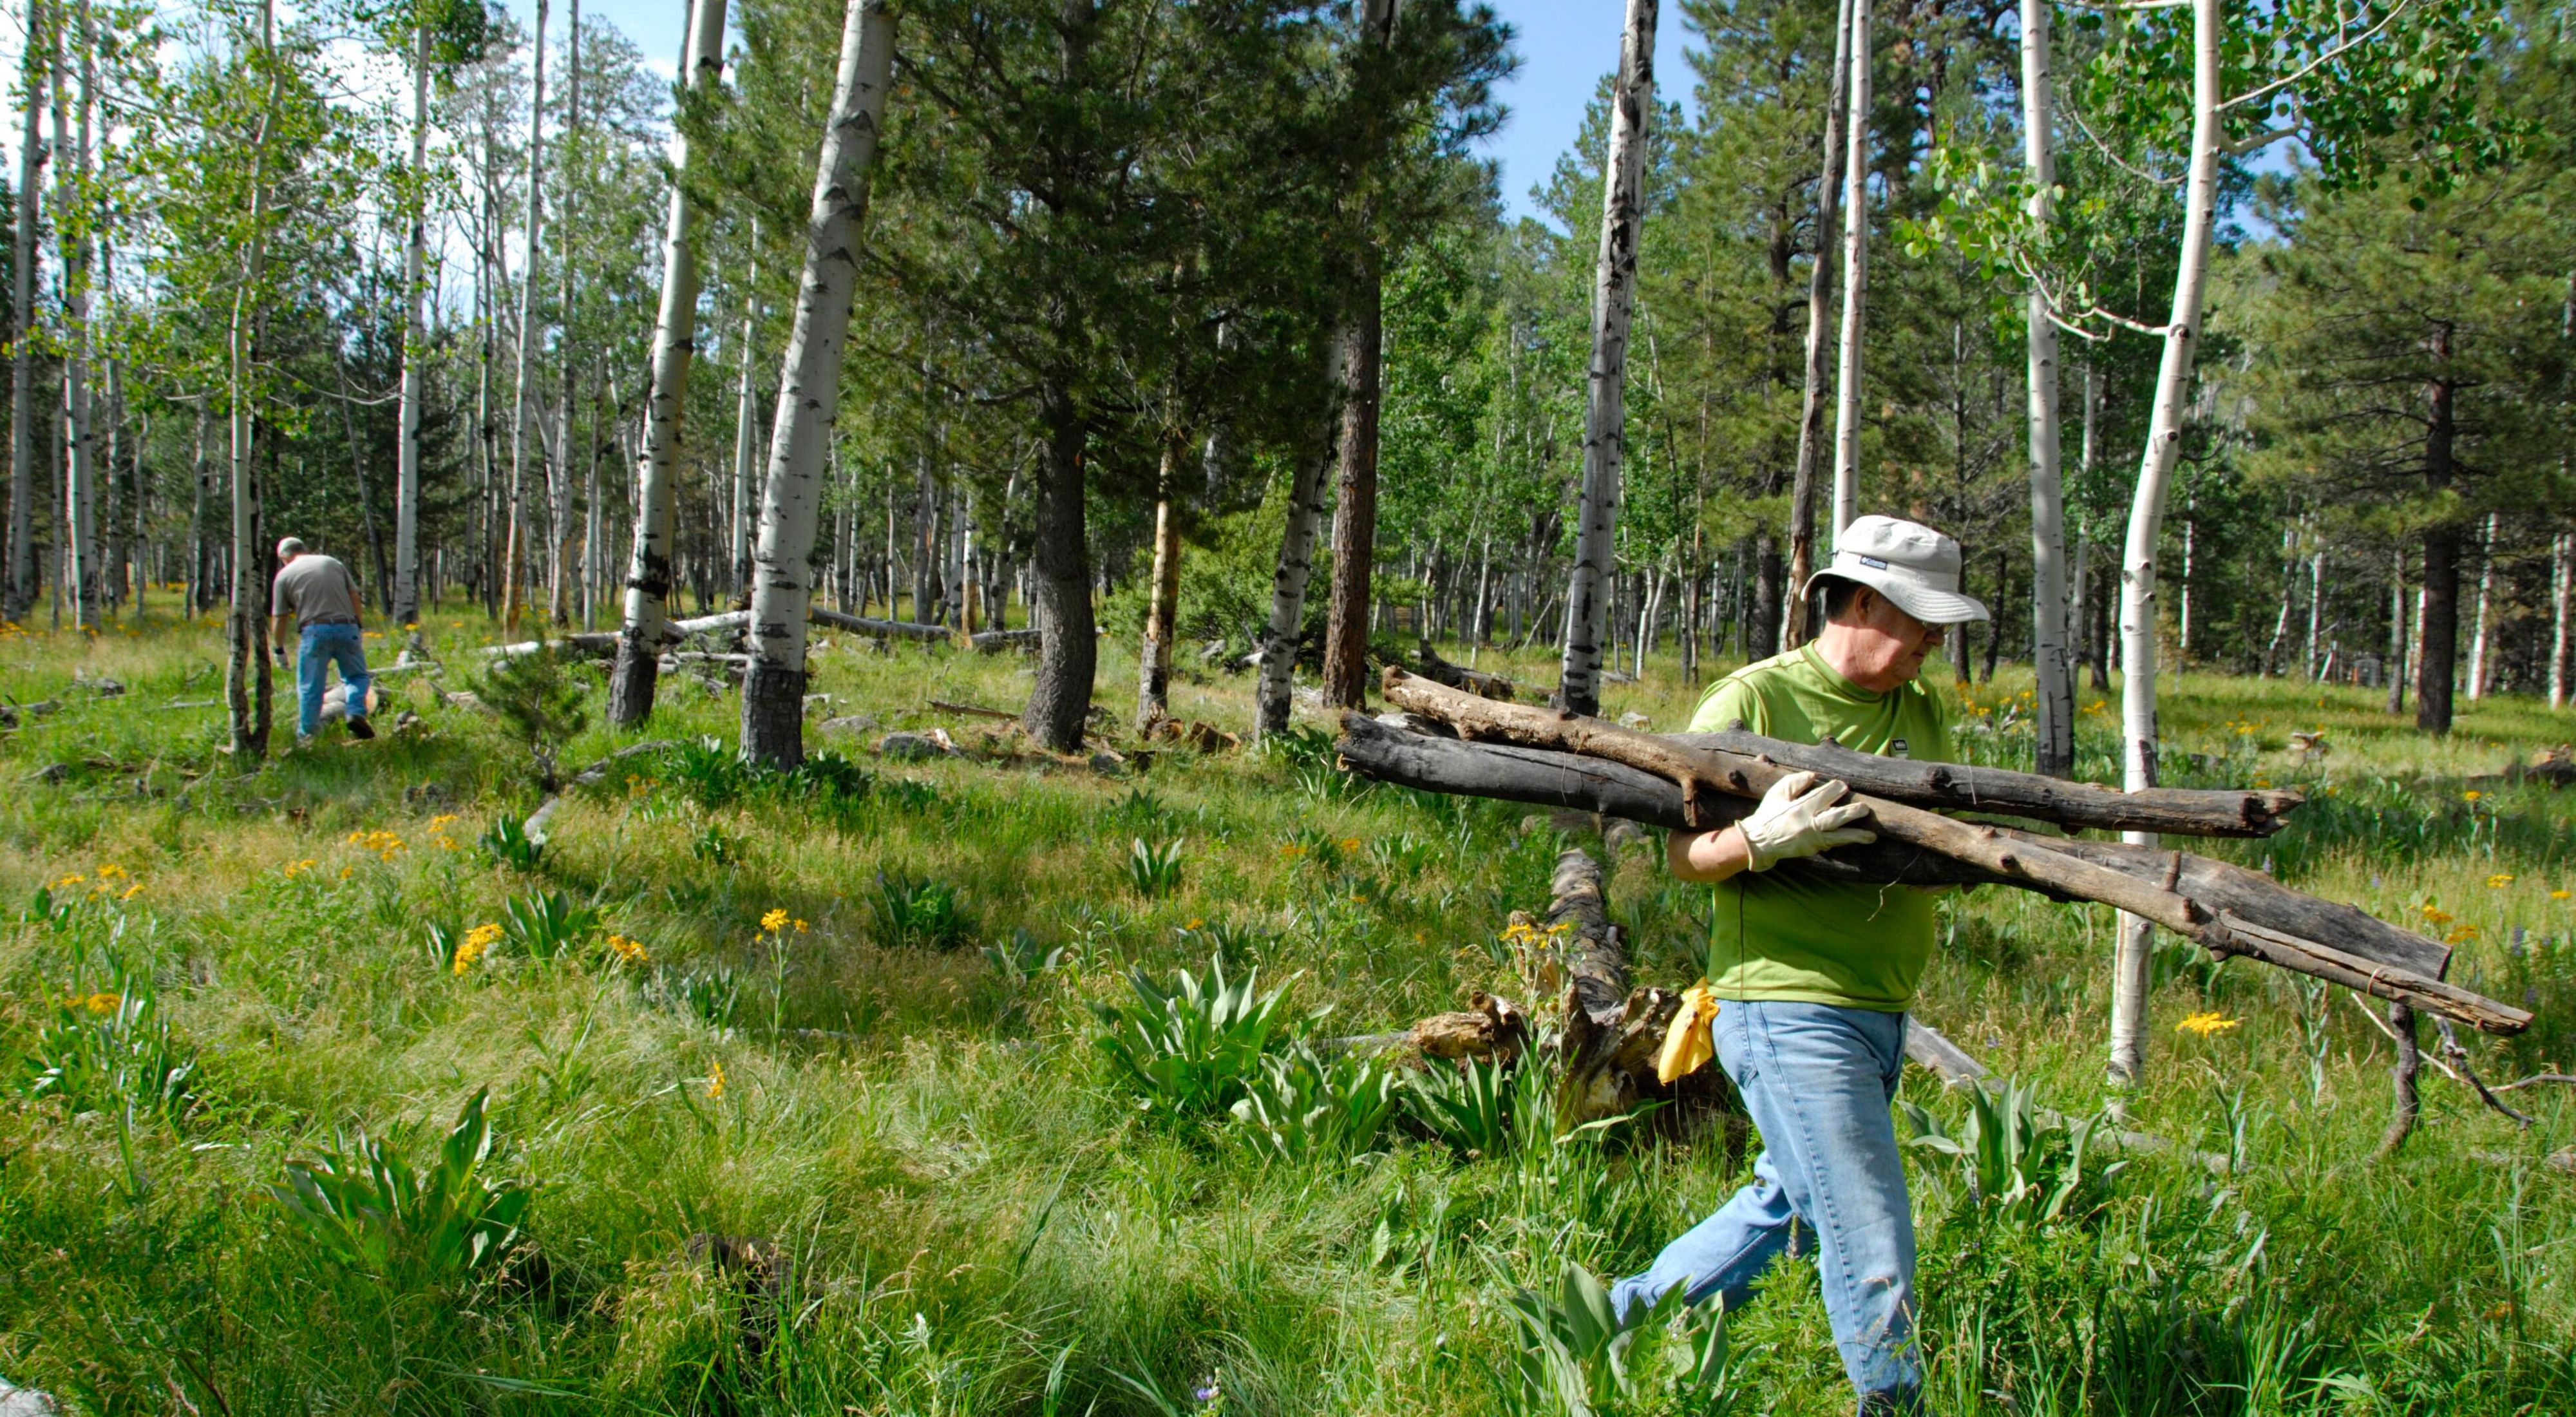 A person wearing a hat and gloves hauls wood at a forest restoration site in Arizona.